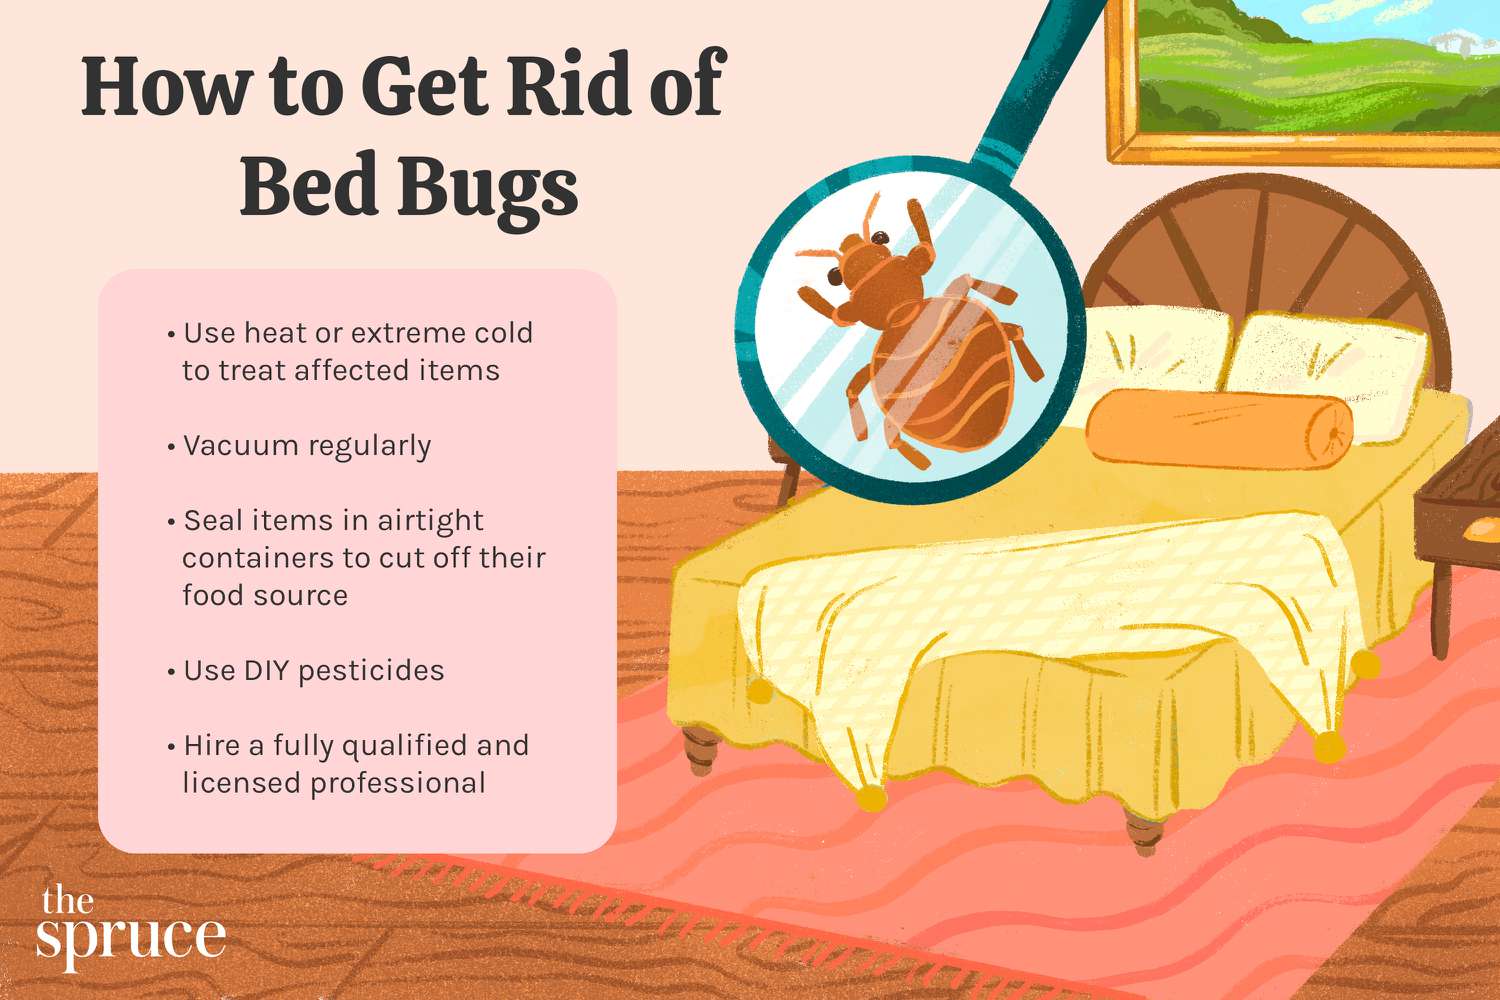 How to Help With Bed Bugs